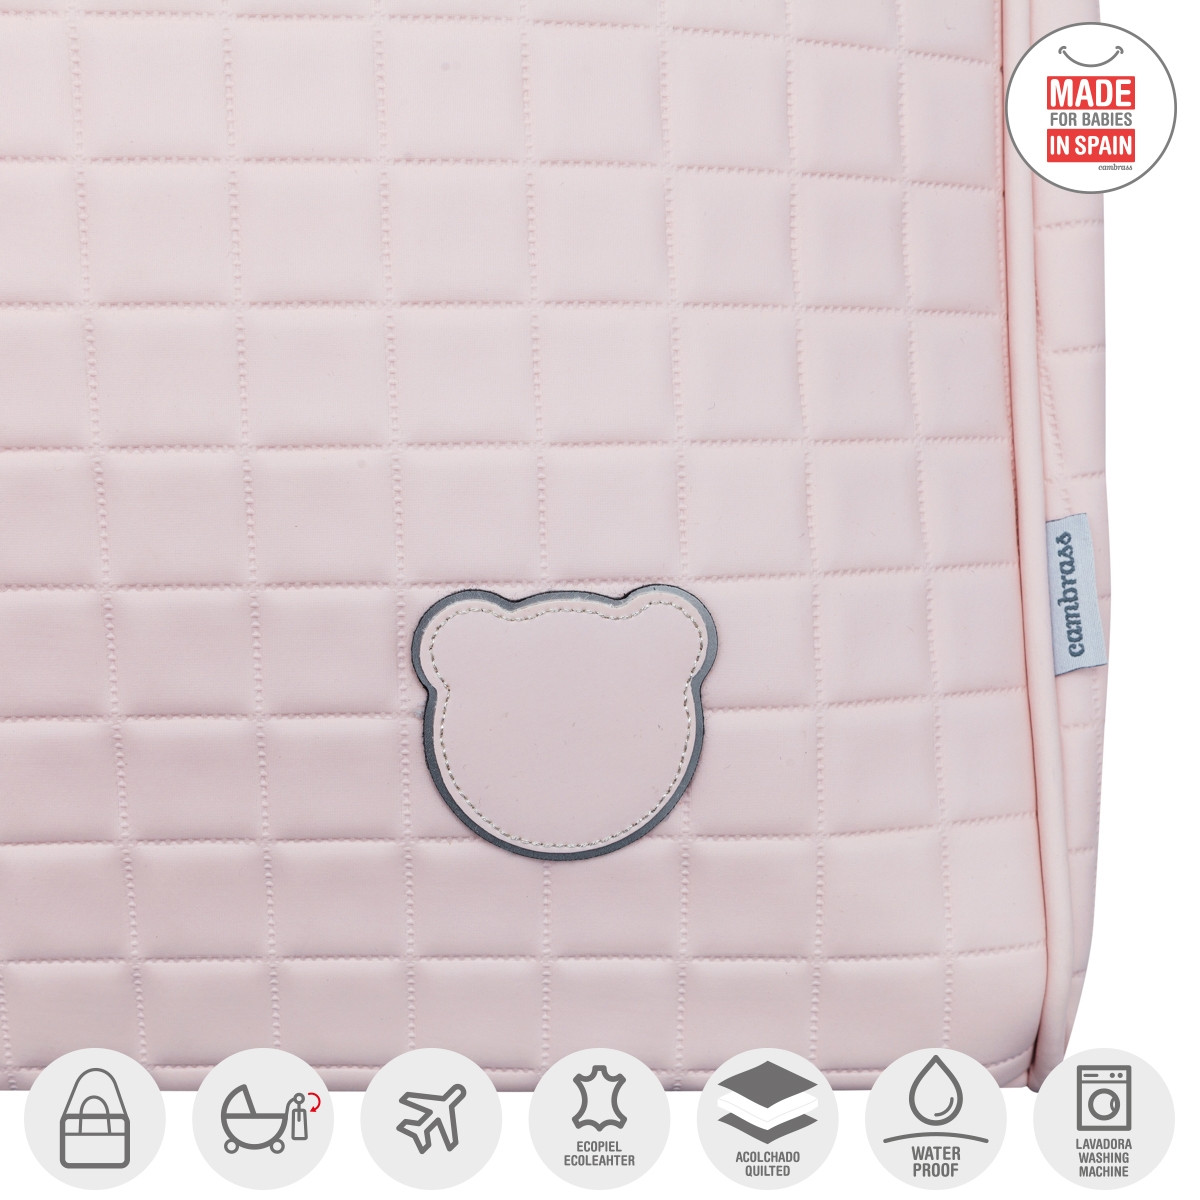 MATERNITY BAG GOFRE PINK 20x44x33 CM CAMBRASS - 7